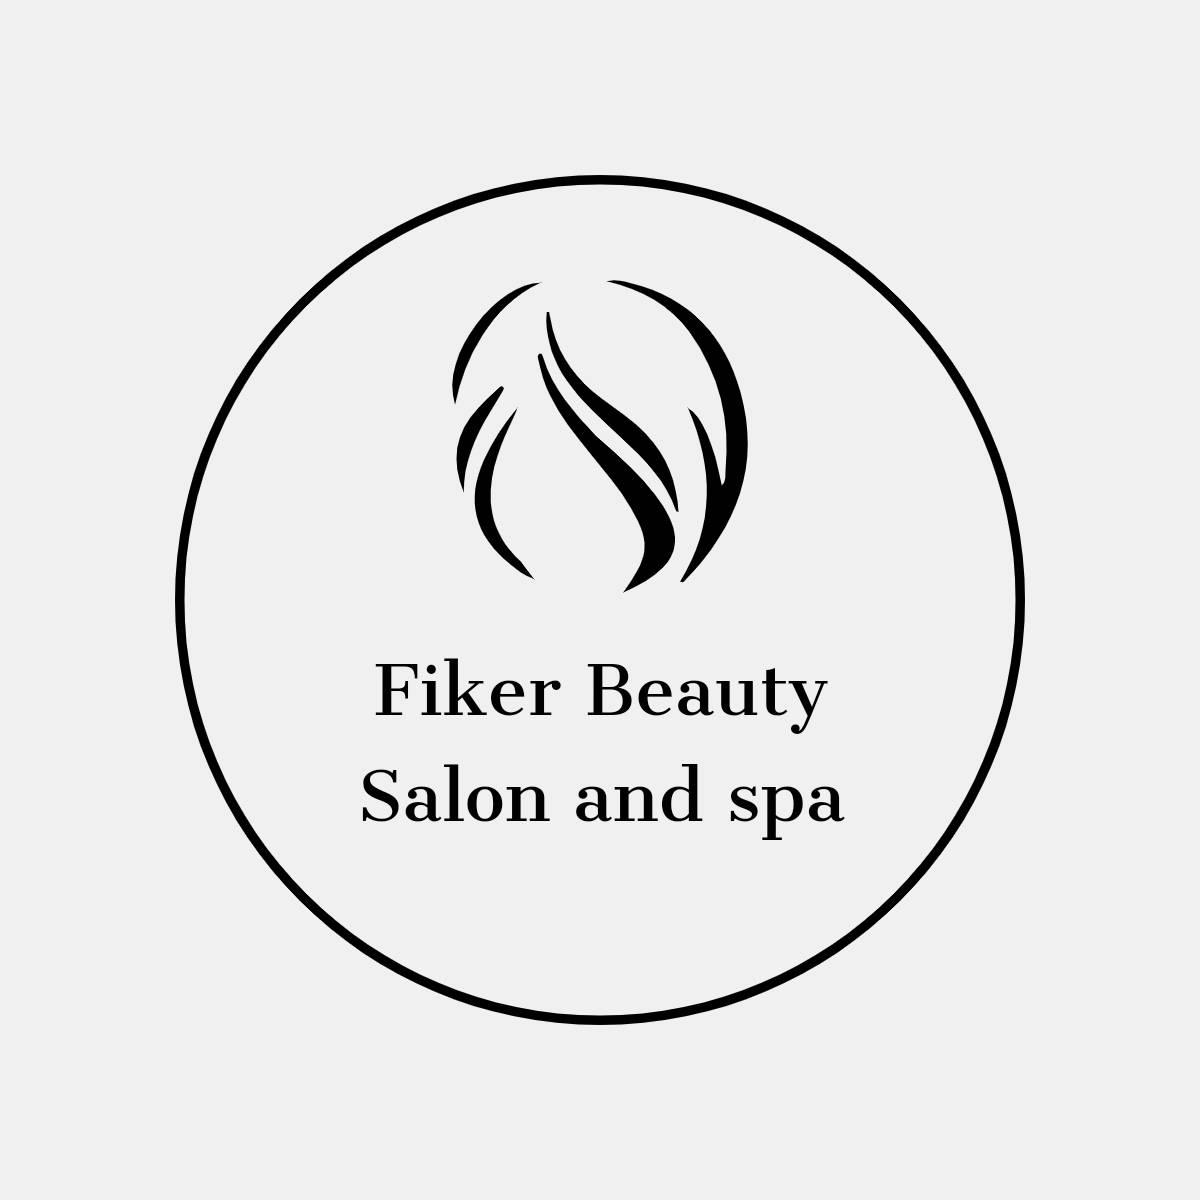 Fiker Beauty Salons and Spa